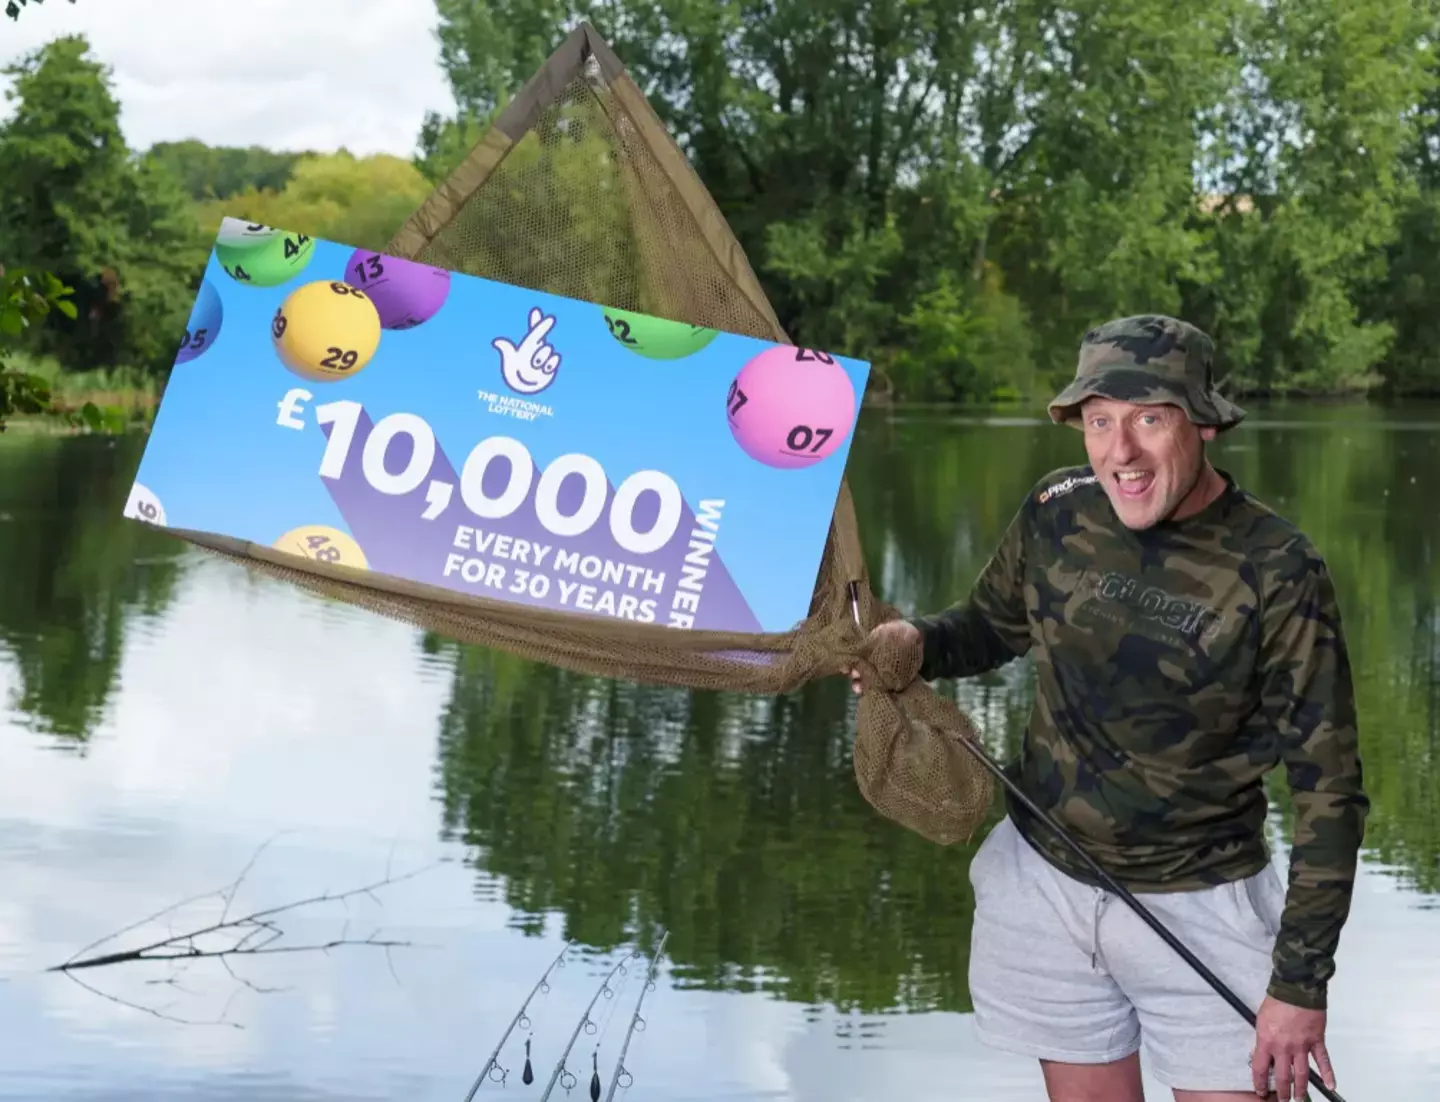 John caught a big win on the National Lottery's Set For Life game.